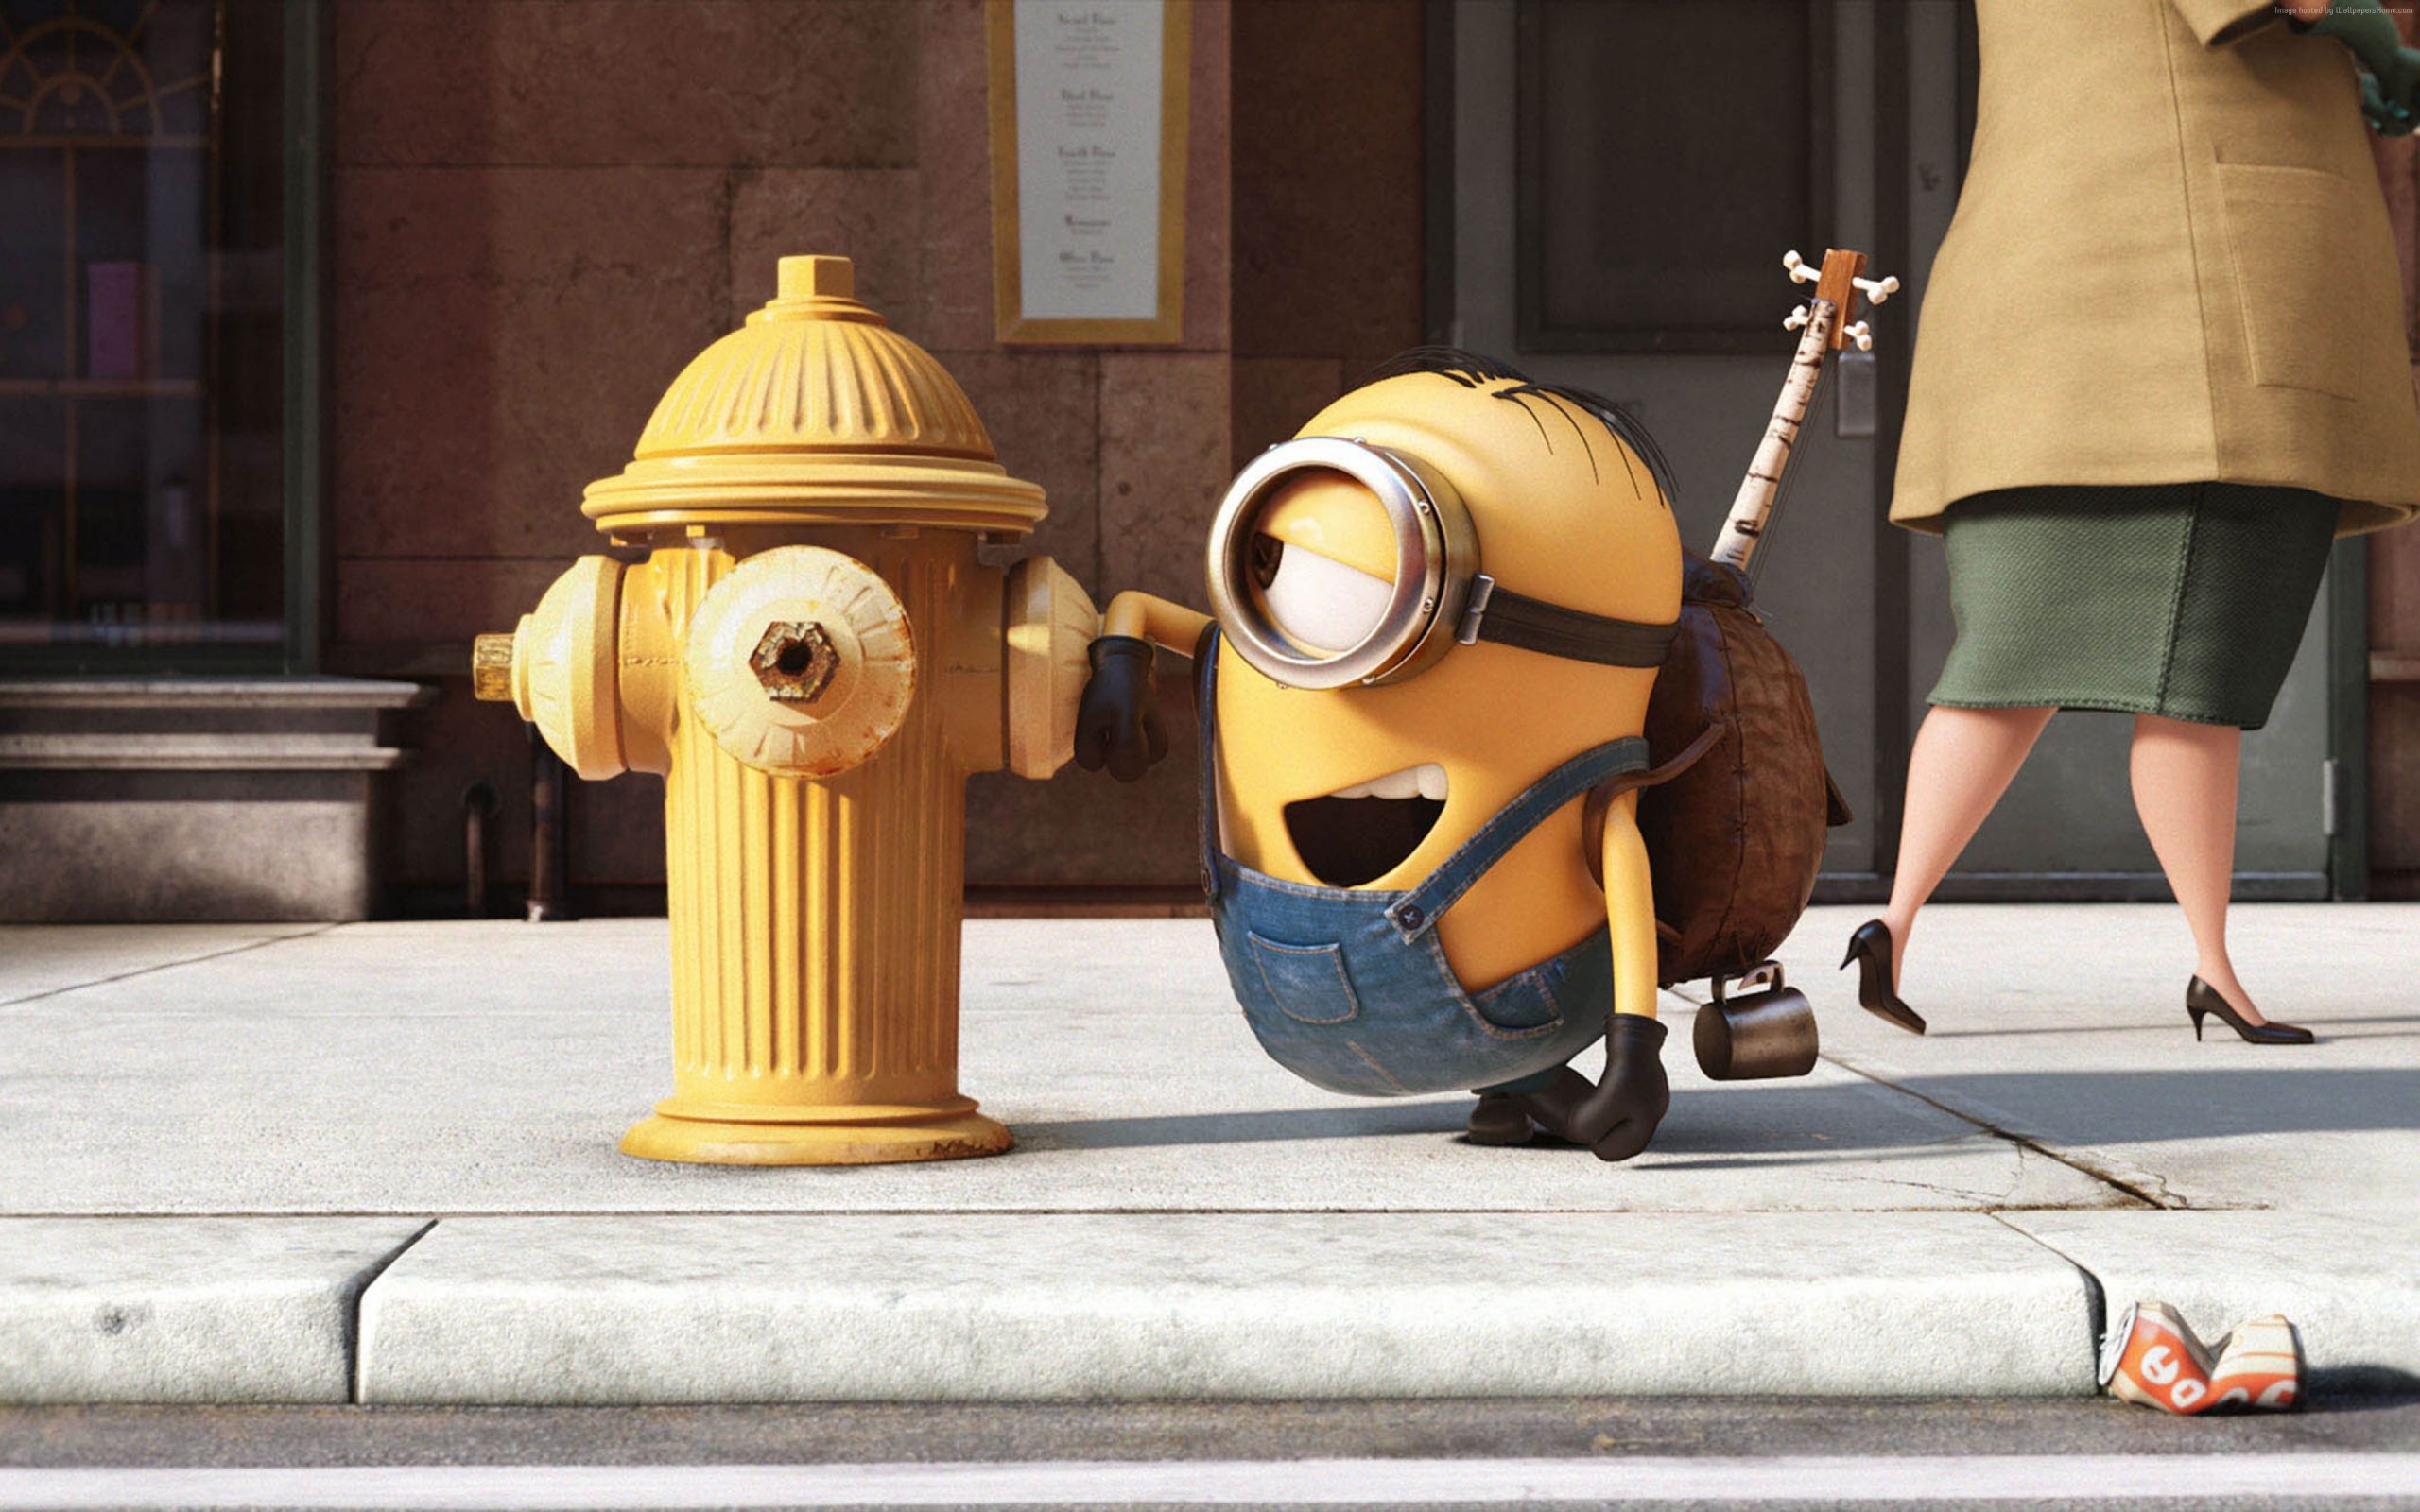 Minions wallpaper, funny, Best Animation Movies of 2015, yellow, cartoon